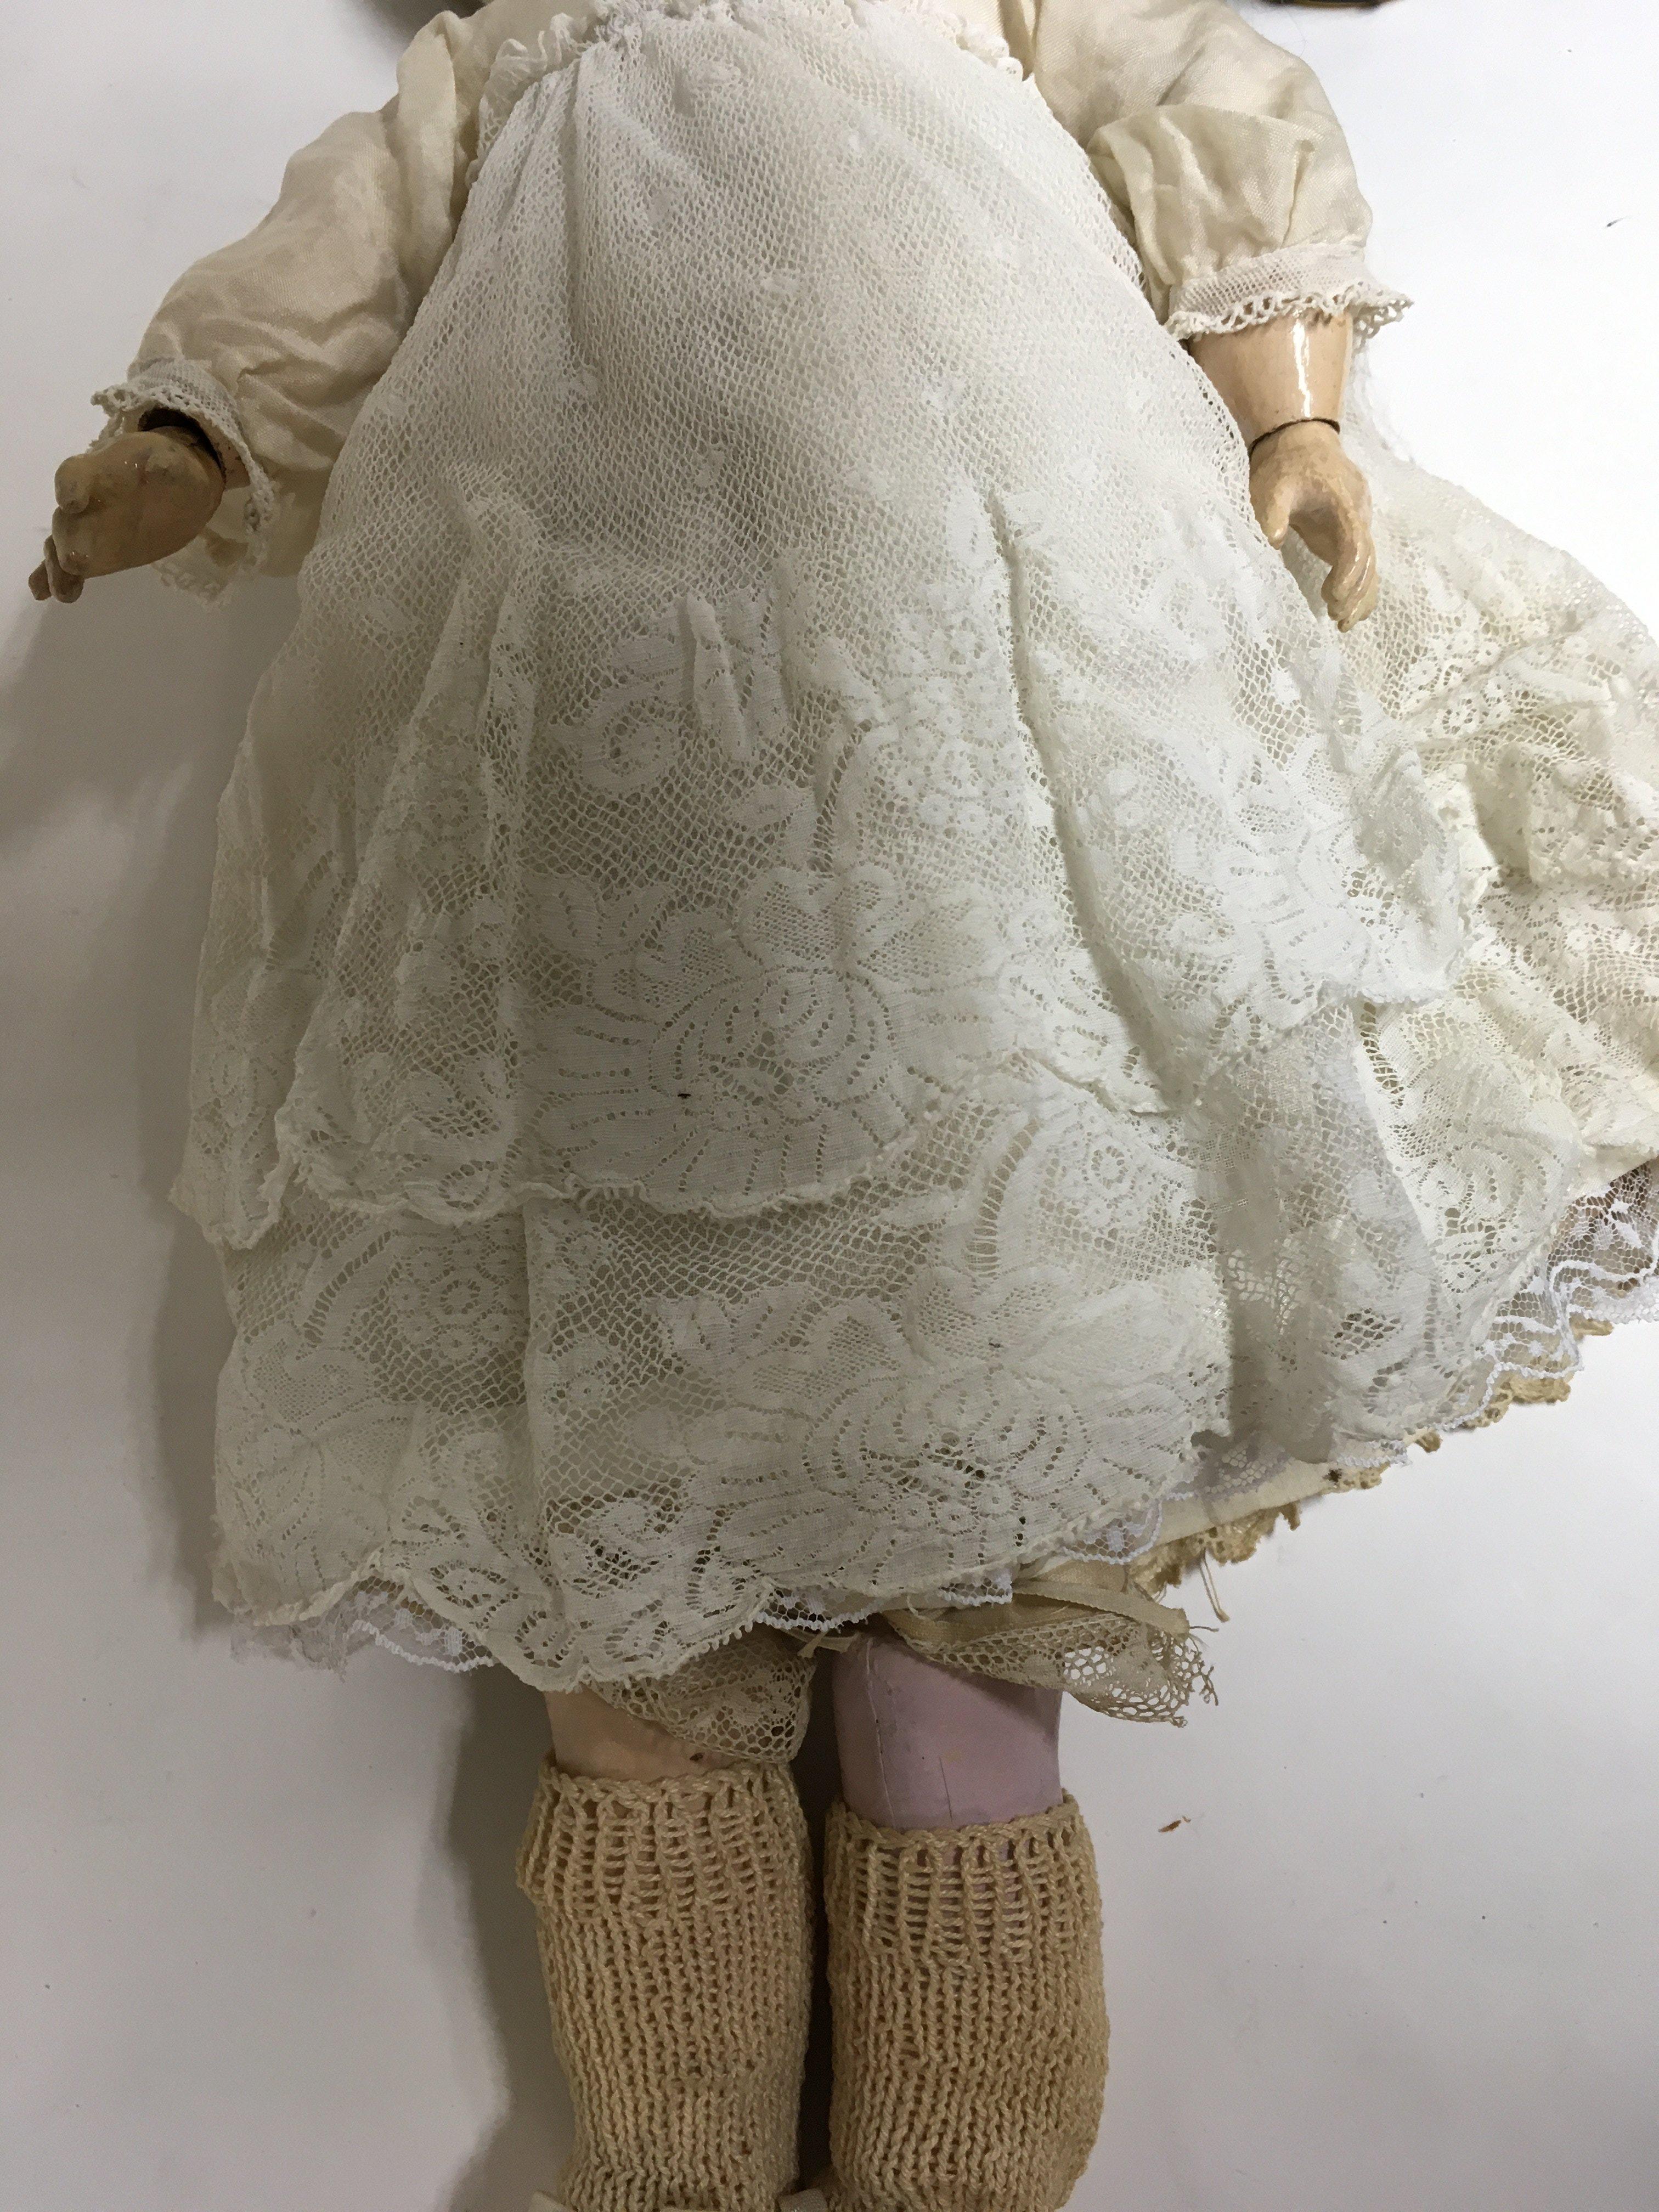 A M German doll marked 370 in Edwardian style dres - Image 5 of 6